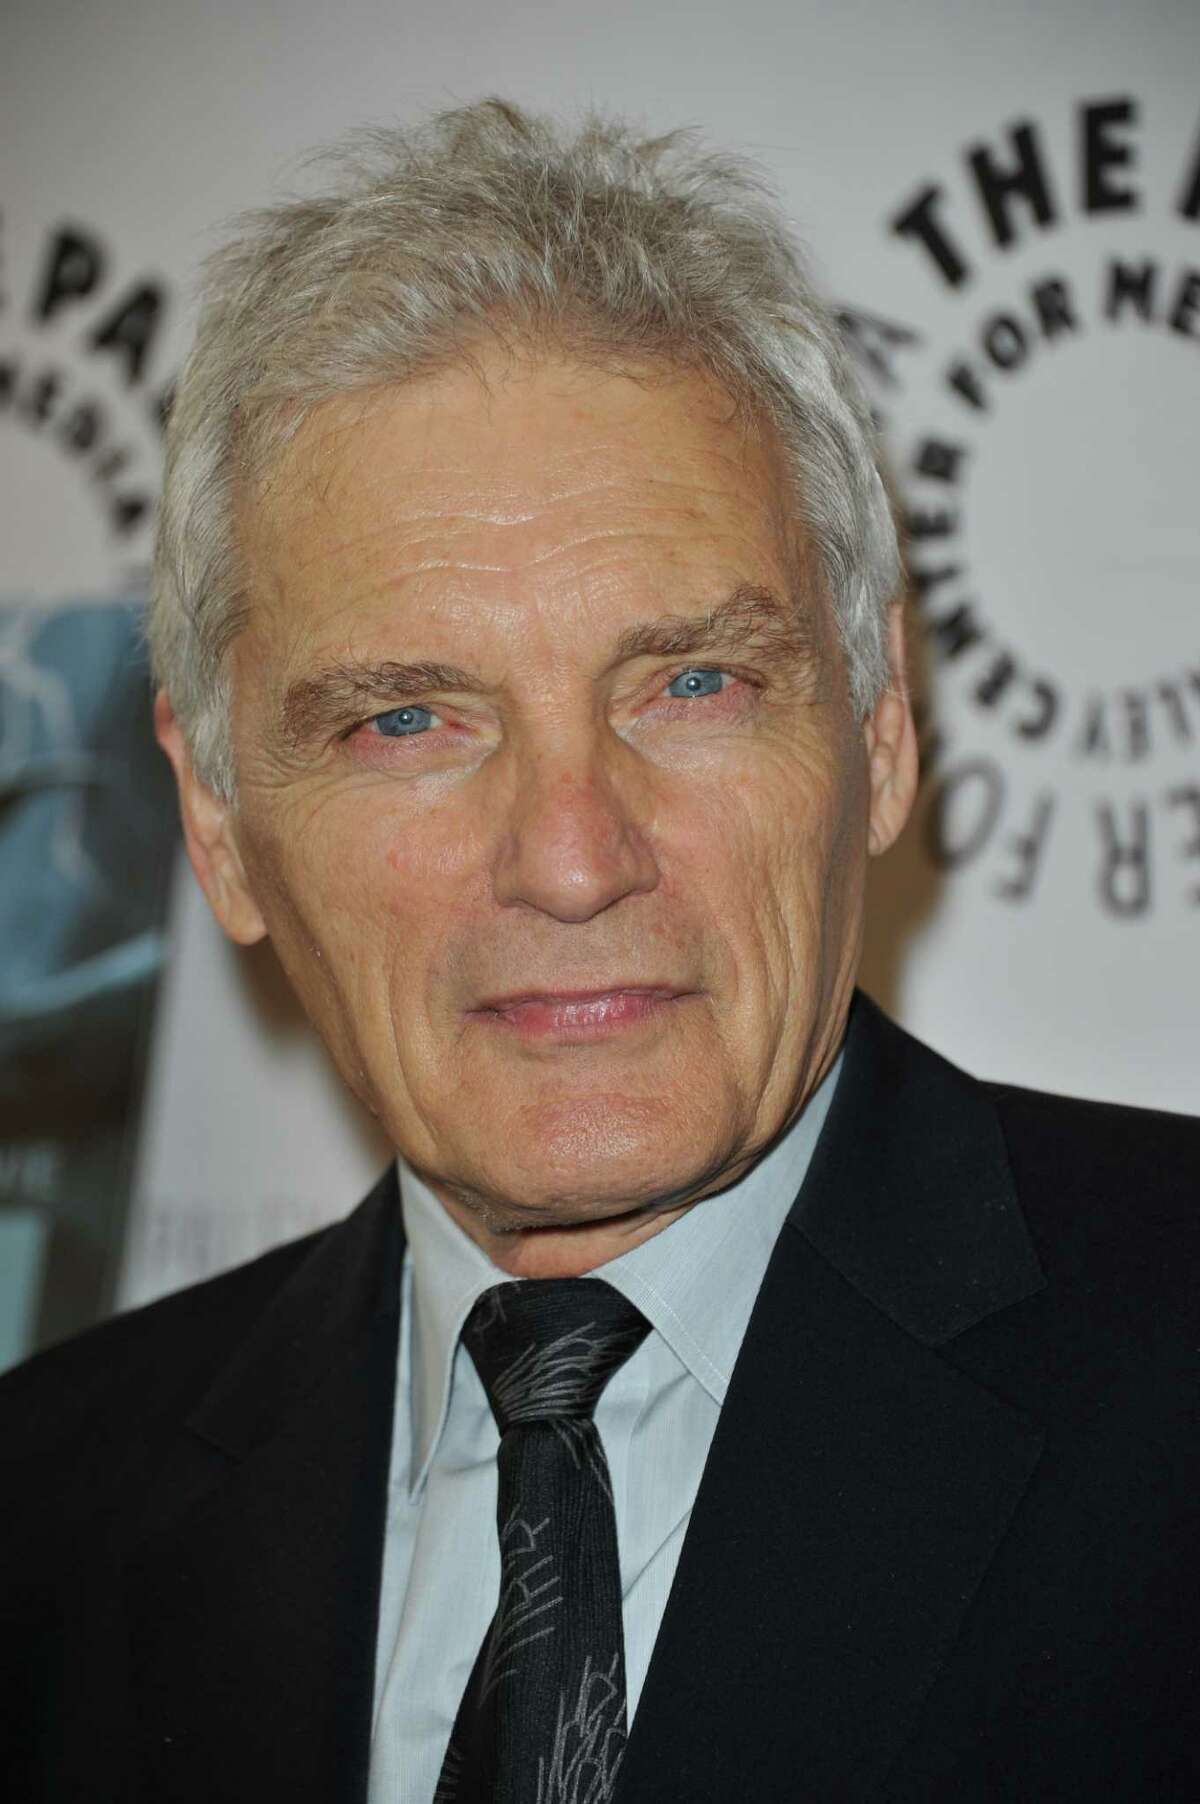 David Selby attends World Premiere of "Batman: The Dark Knight Returns Part 1" at The Paley Center for Media on Monday, Sept. 24, 2012, in Beverly Hills, Calif. (Photo by Richard Shotwell/Invision/AP)